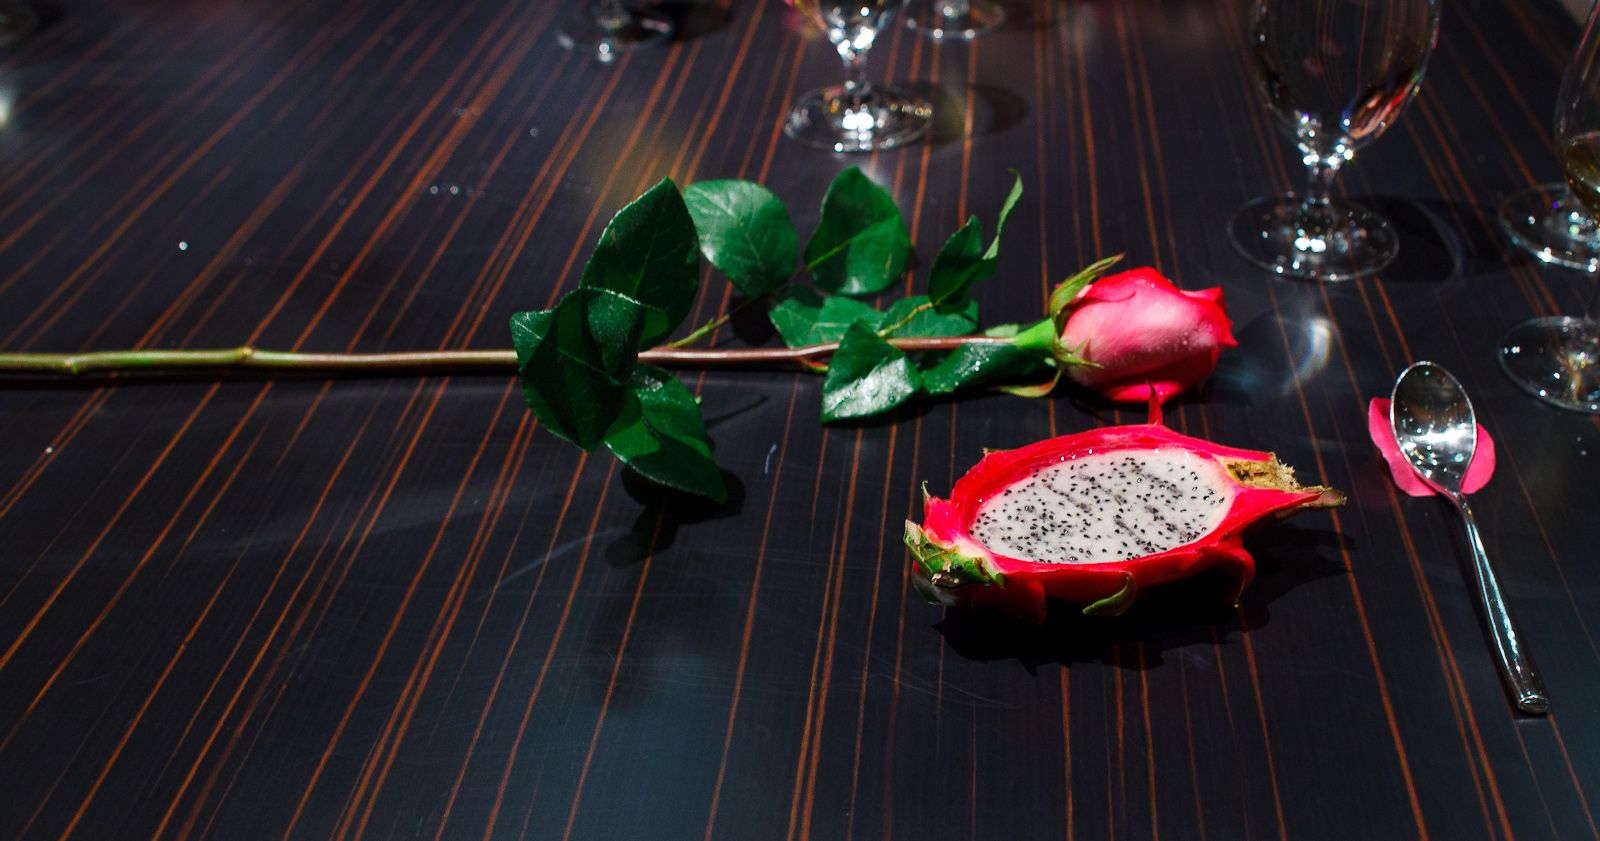 8th Course: Dragon fruit with rose